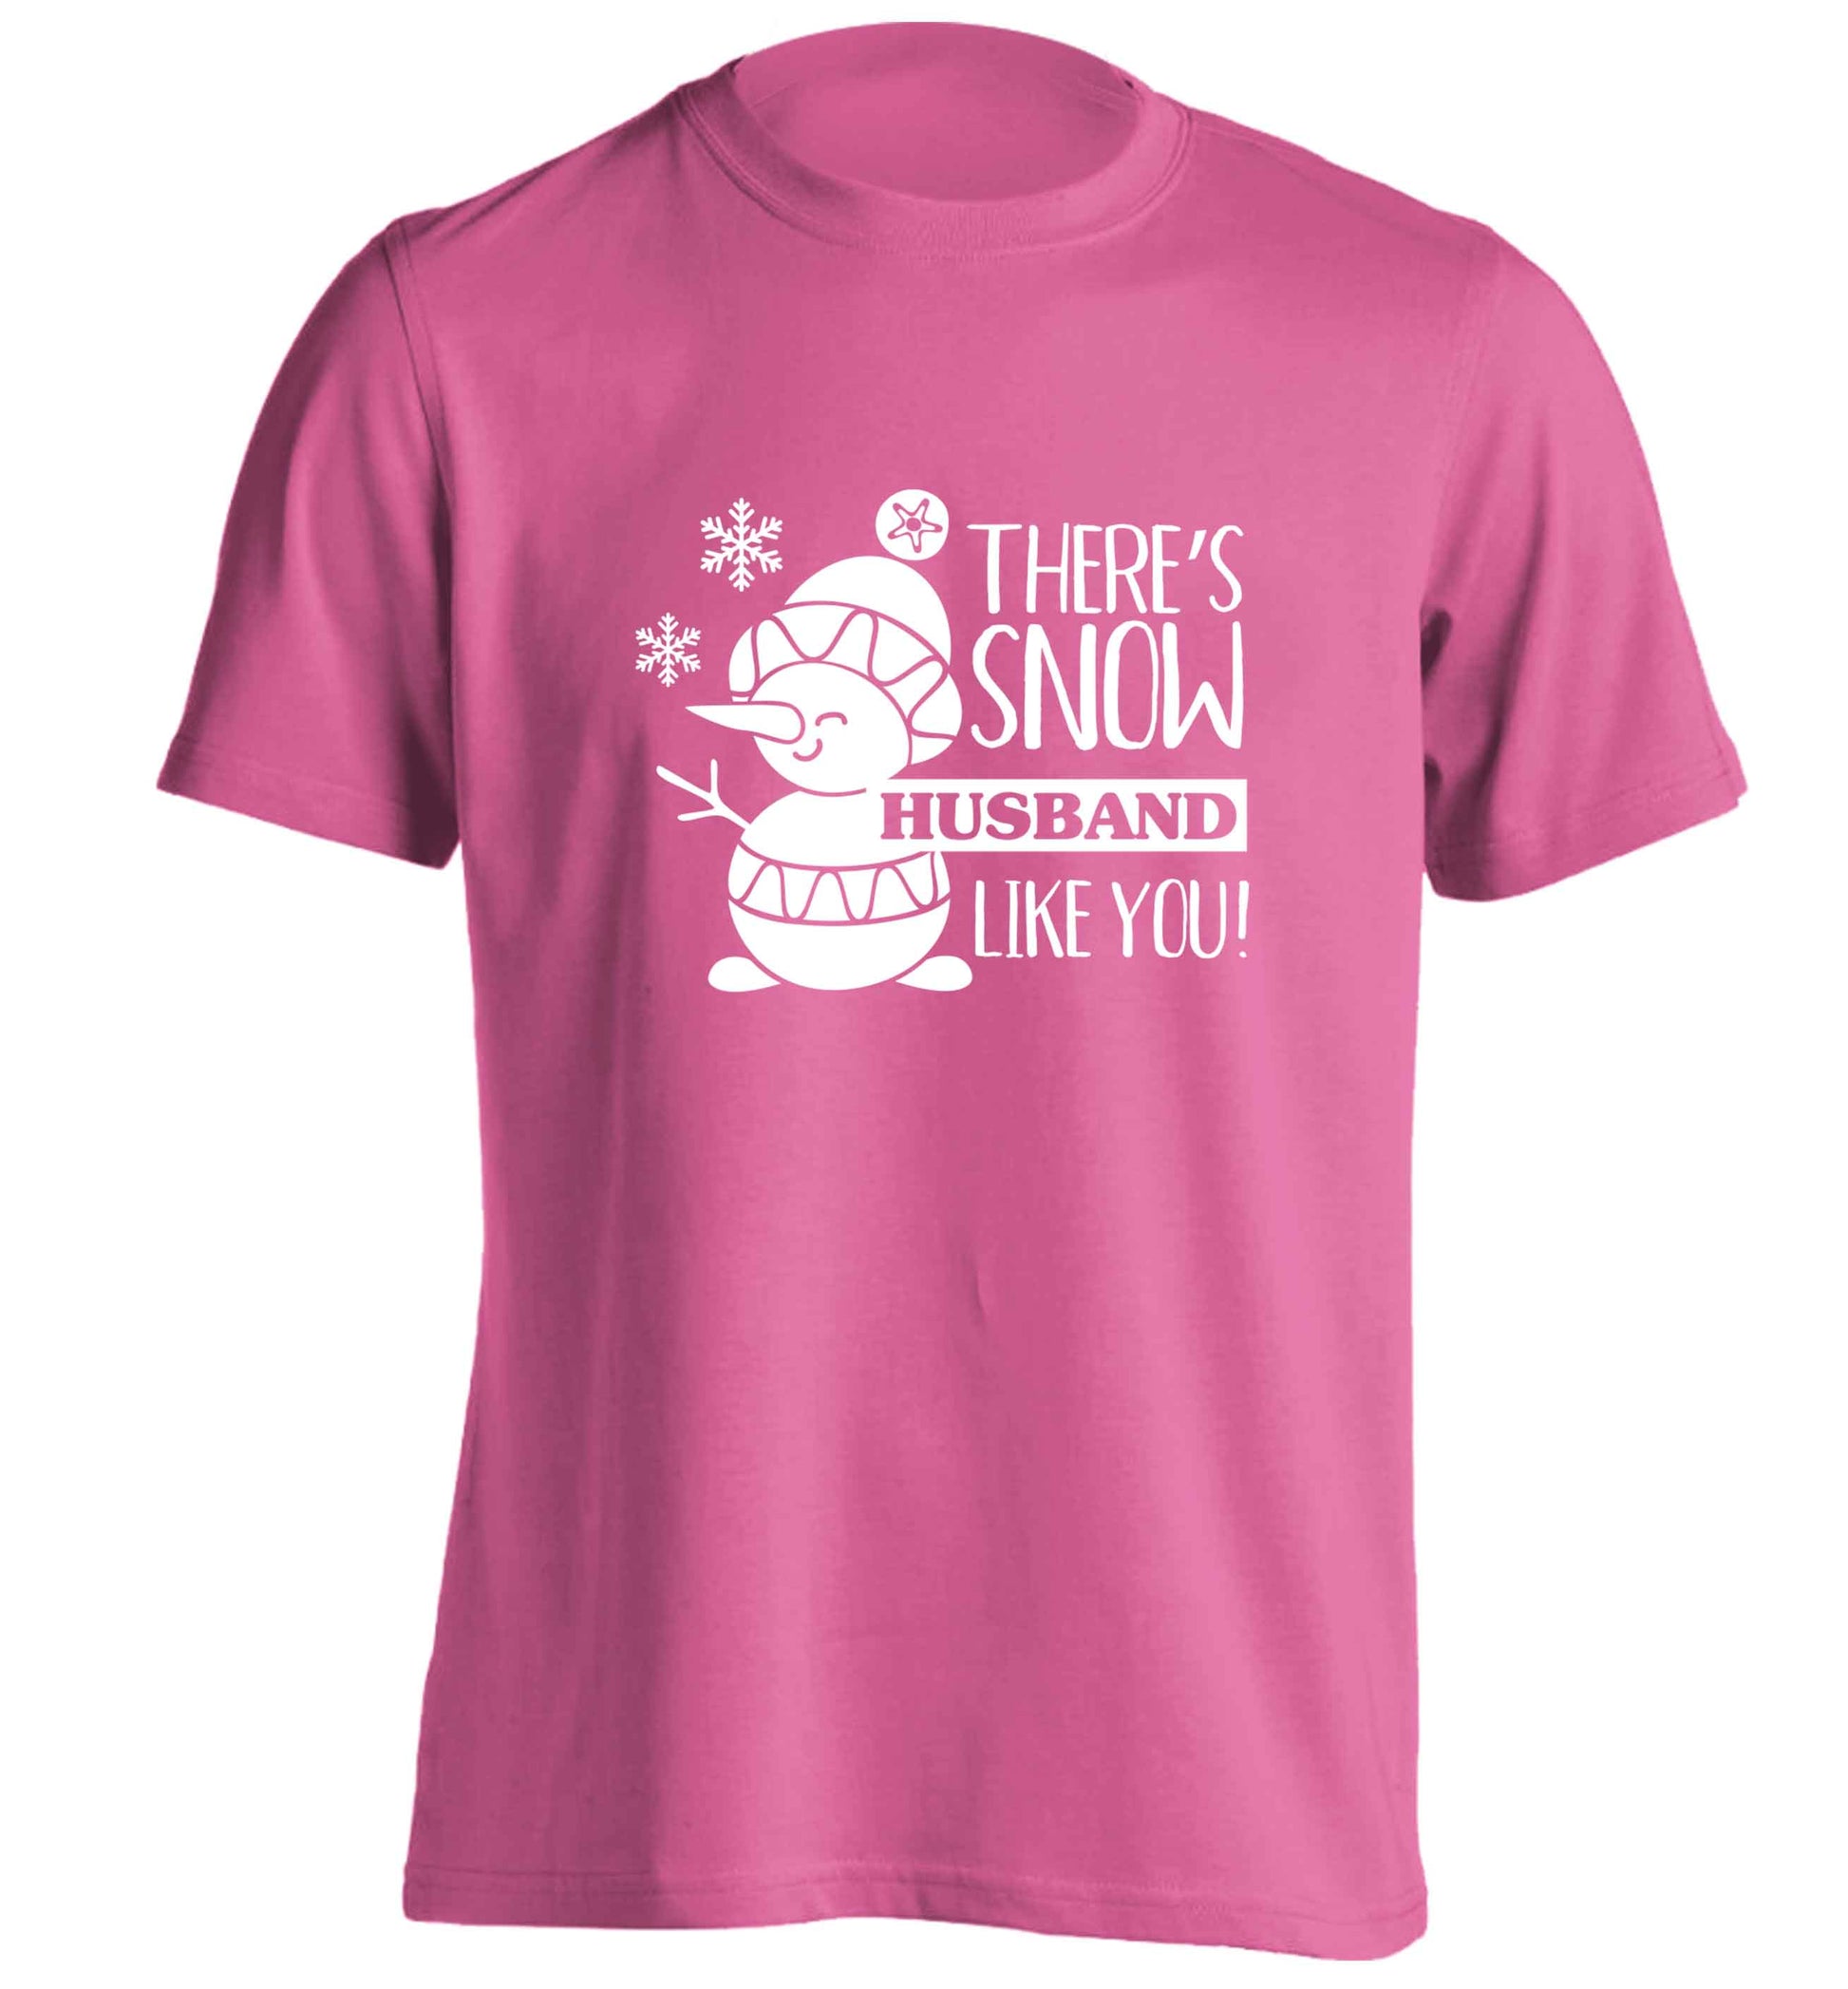 There's snow husband like you adults unisex pink Tshirt 2XL